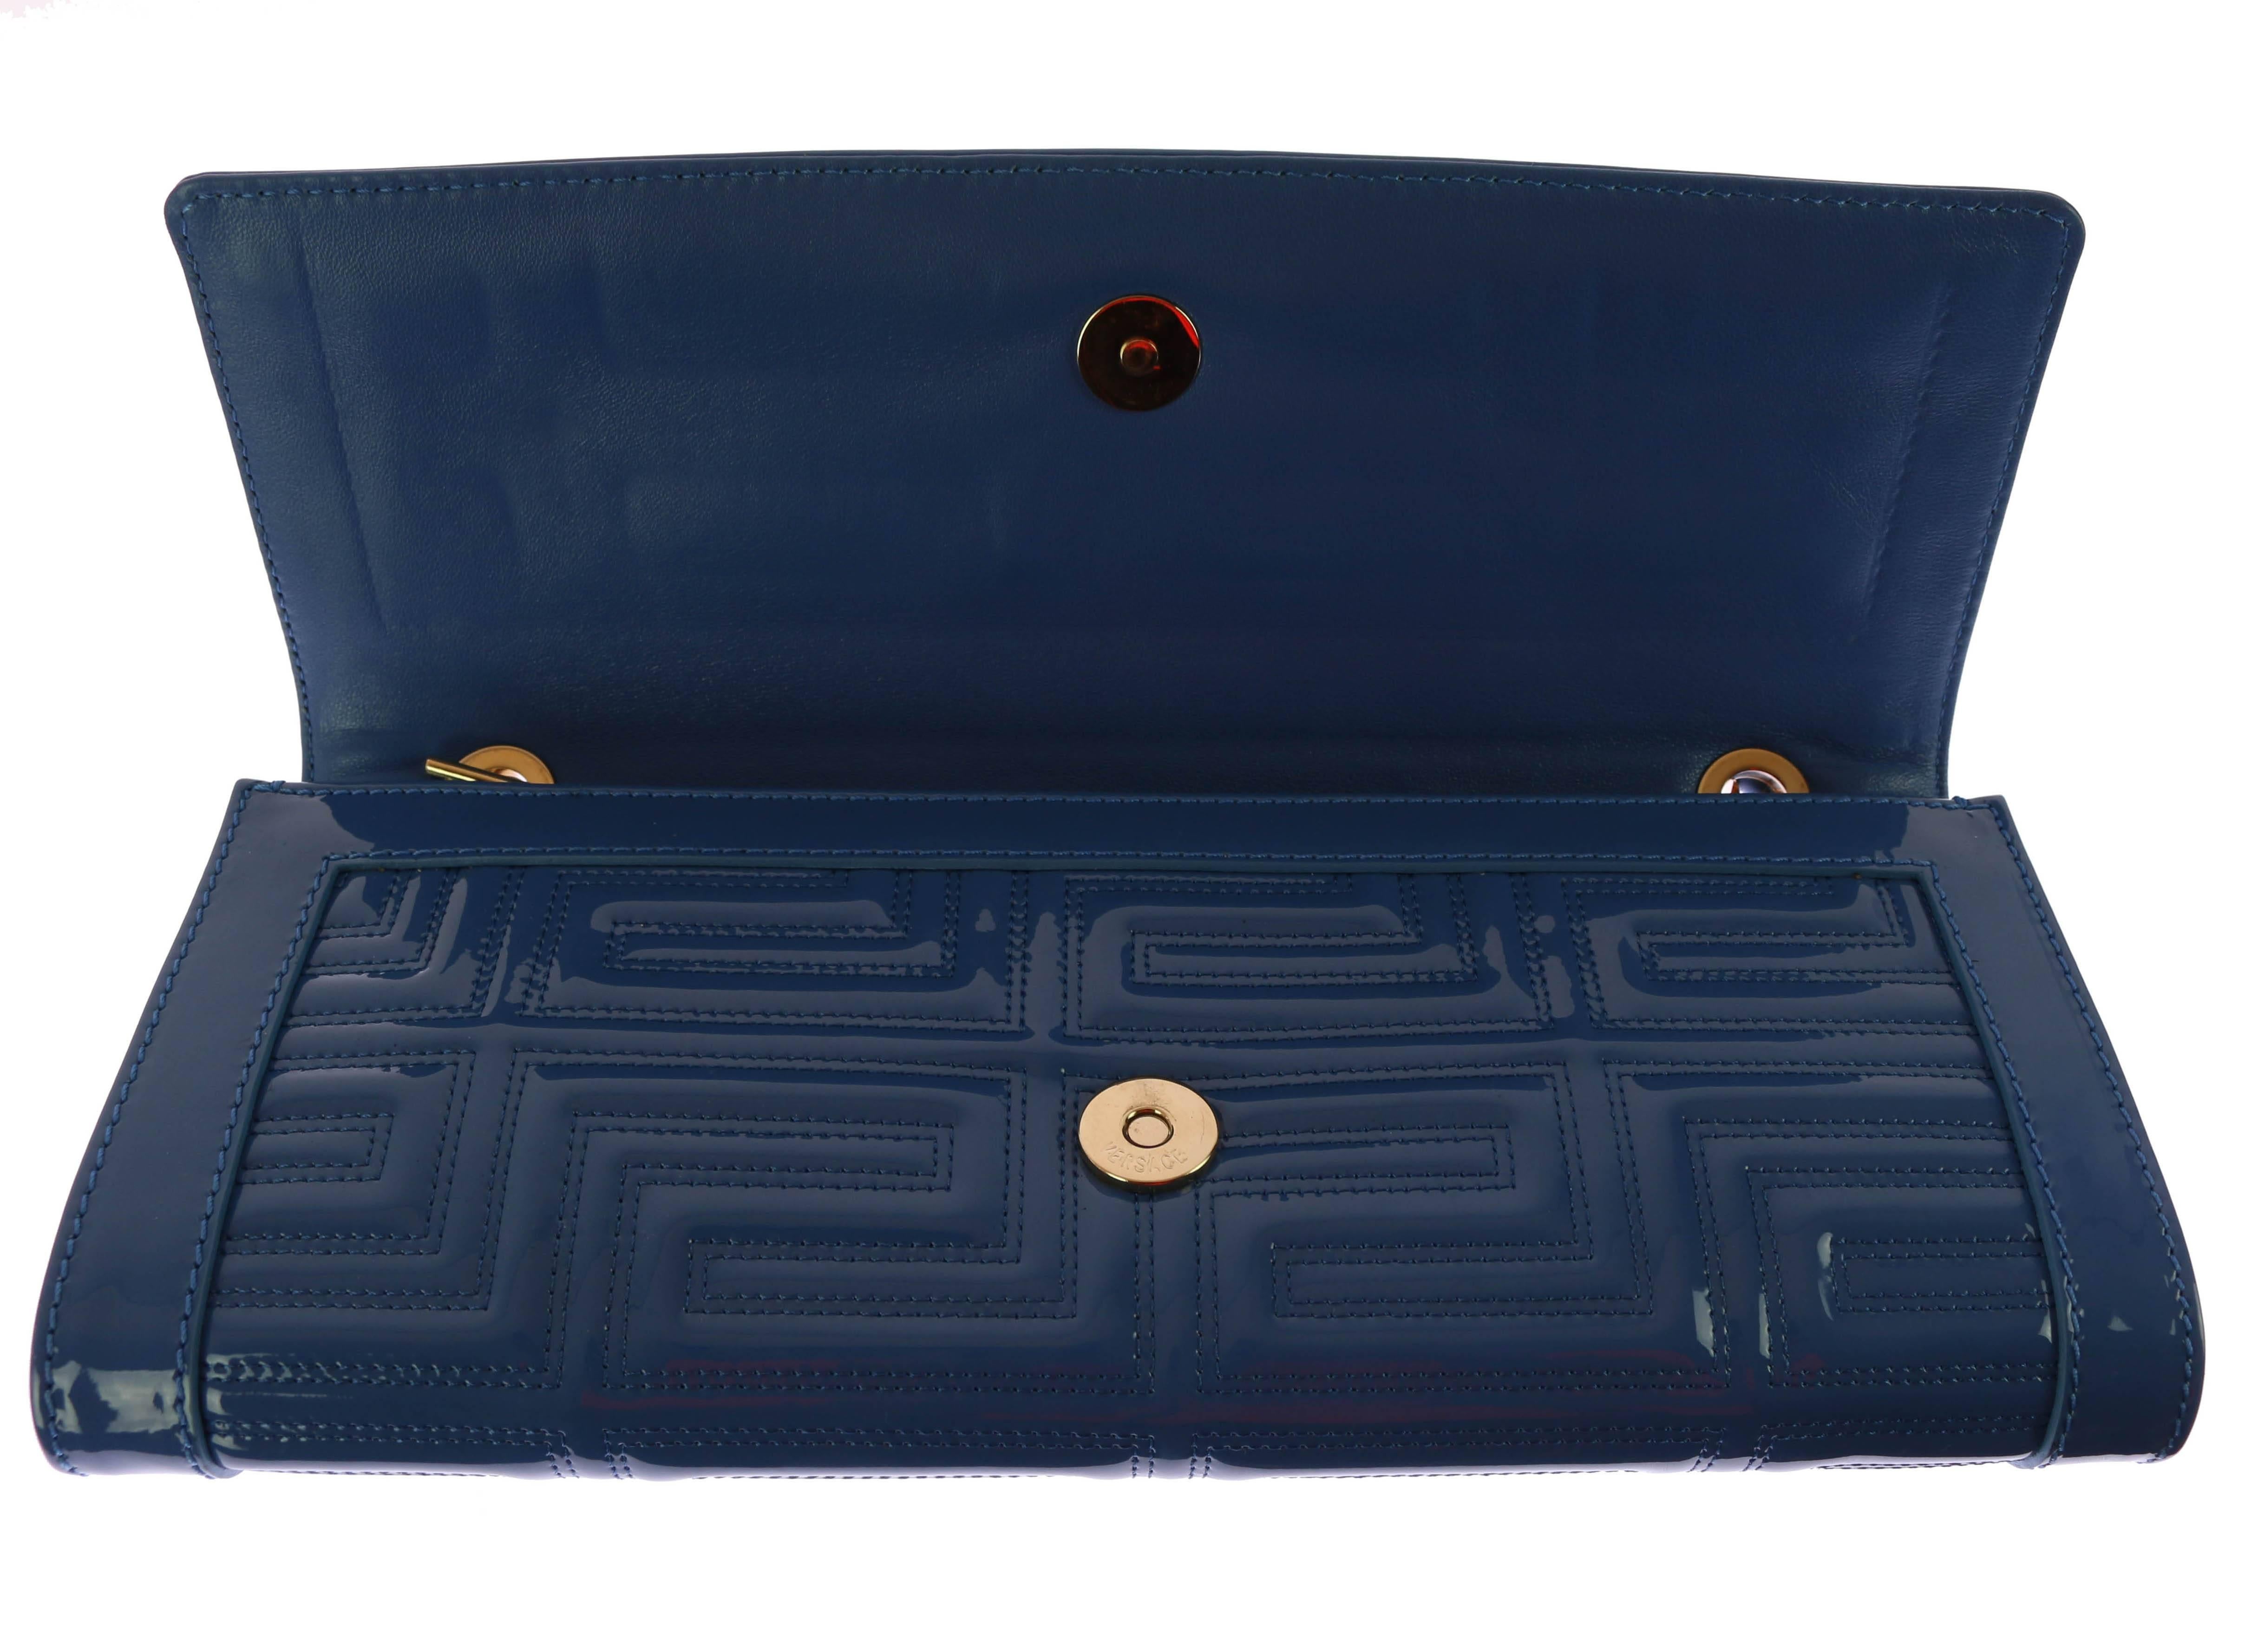 Blue Gianni Versace Couture blue patent leather bag clutch with chain